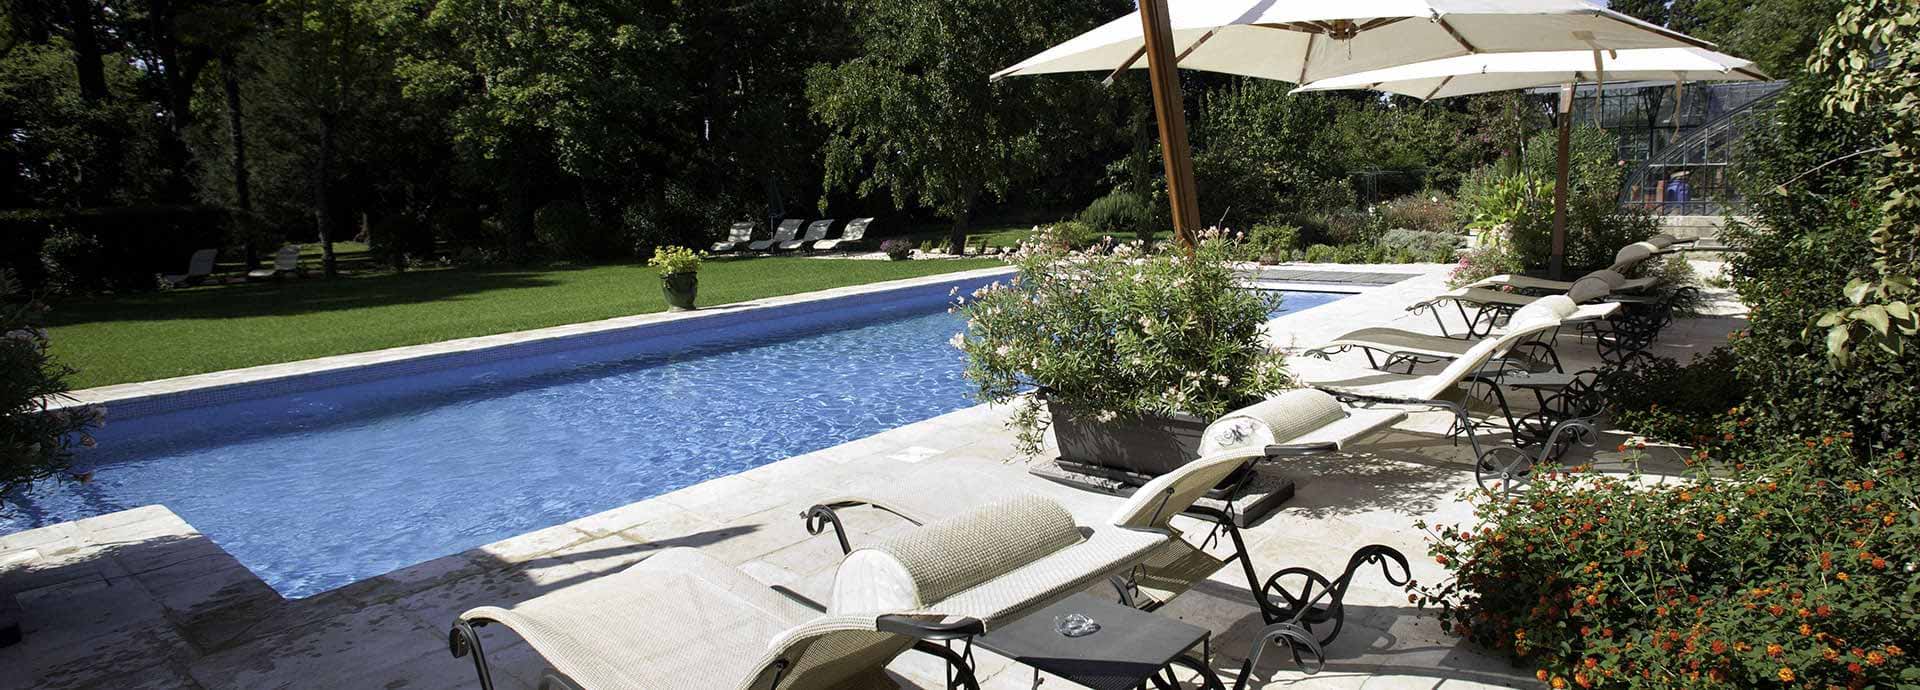 Free access swimming pool with private terrace and garden furniture, Silène guesthouse in Domaine de la Vernède